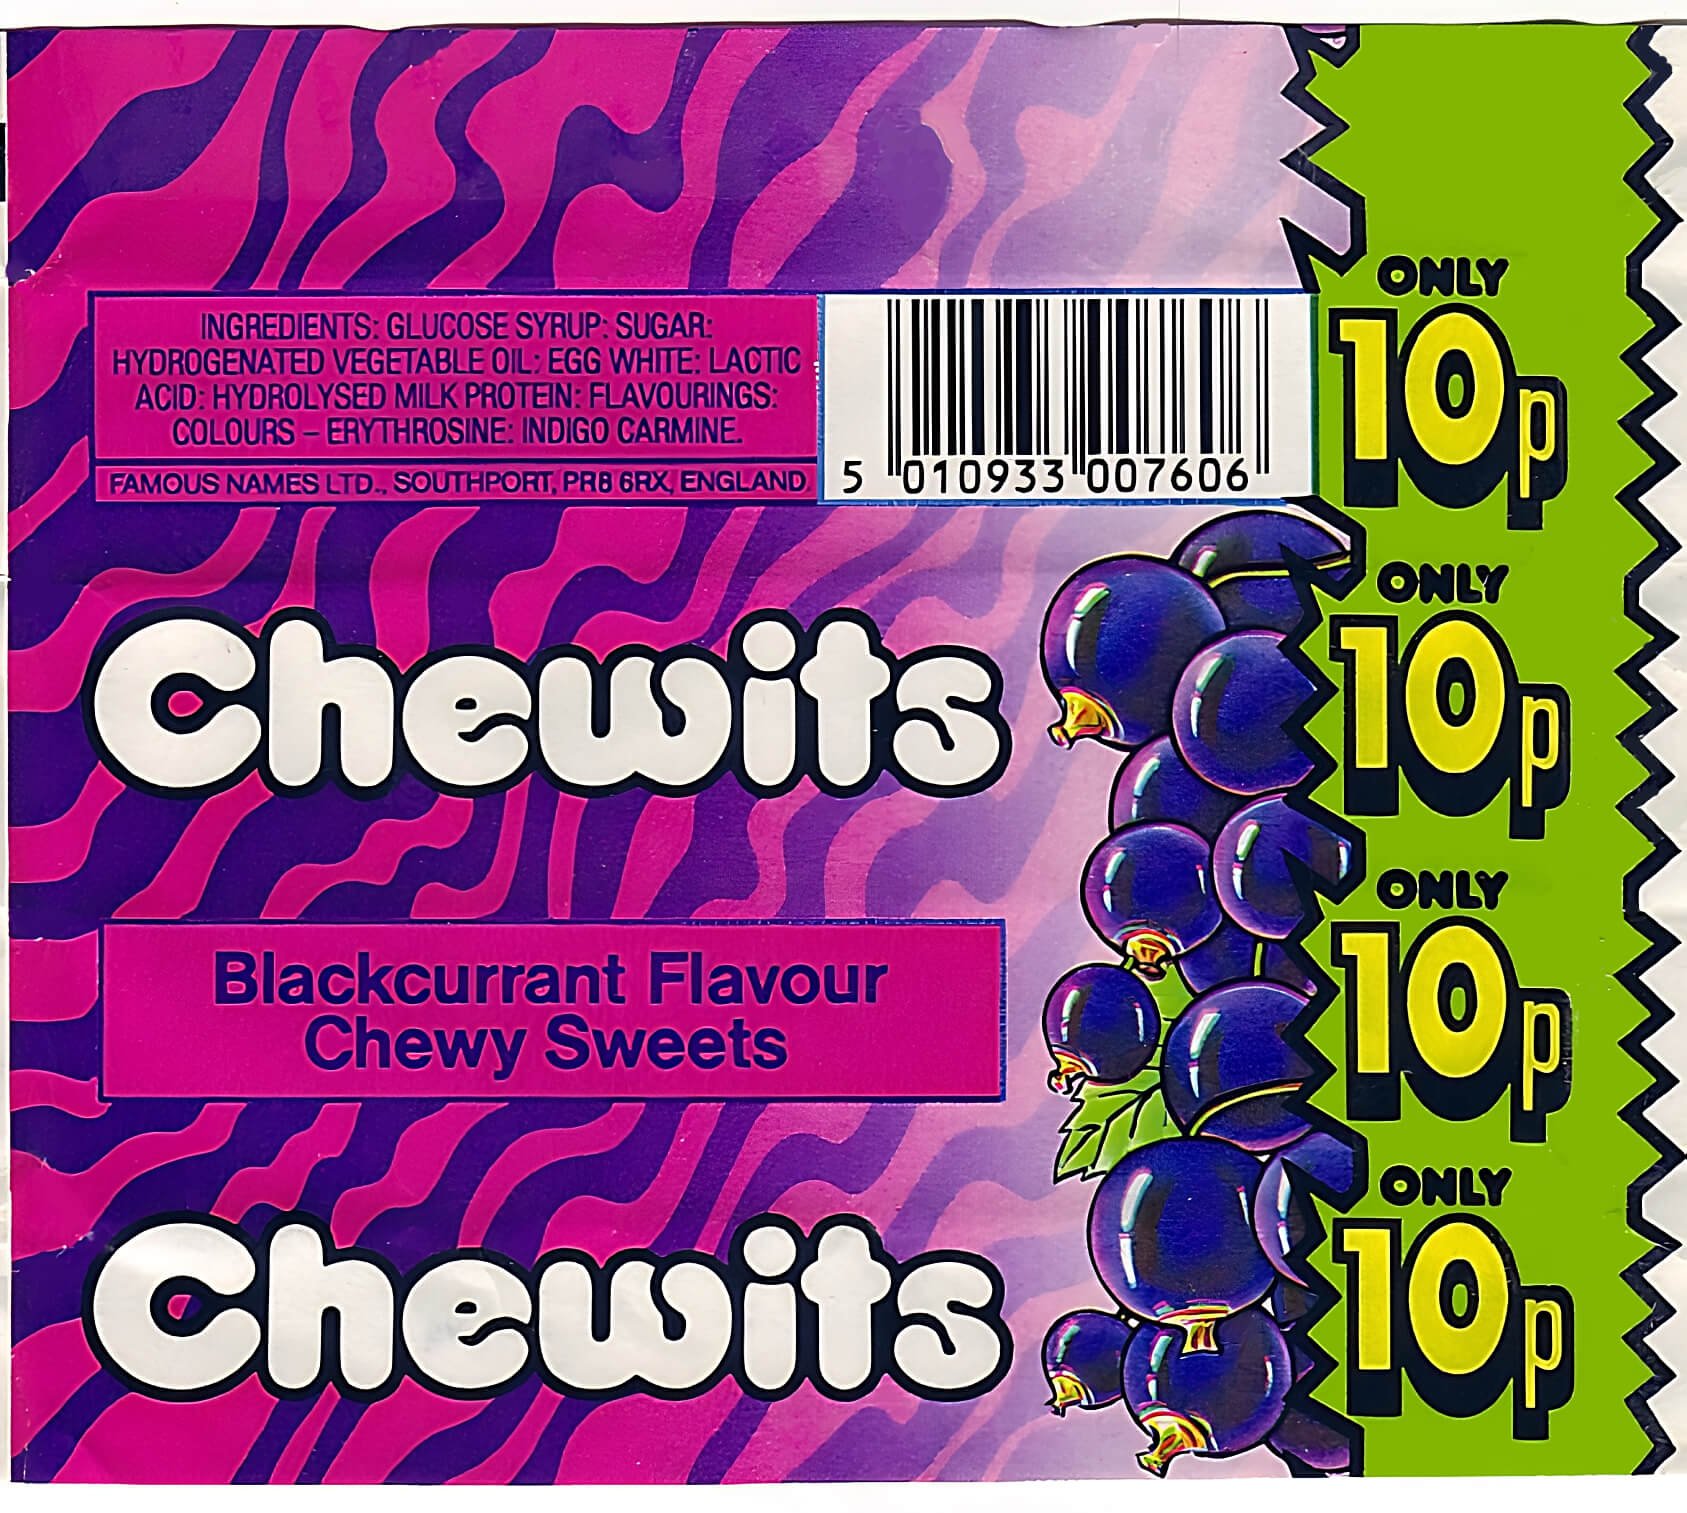 Chewits Blackcurrant Flavour. Pink and purple wrapper from 1989, Only 10p highlighted in yellow and black with a green background.